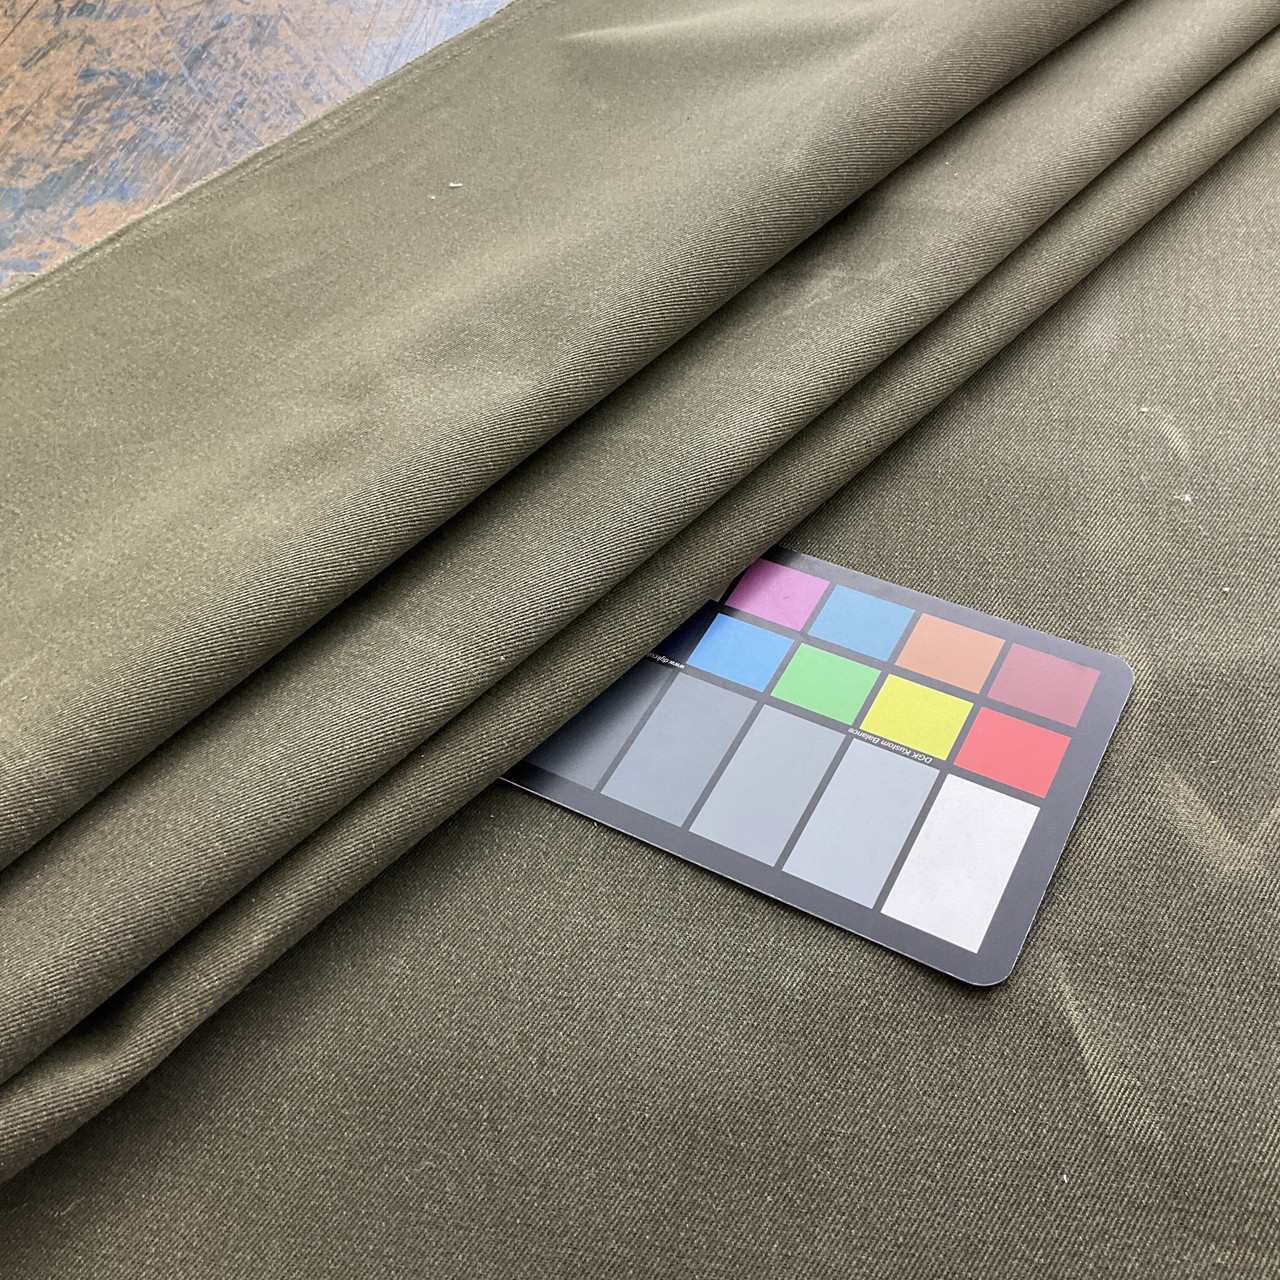 Folded twill fabric in light gray; soft grey material pressed with